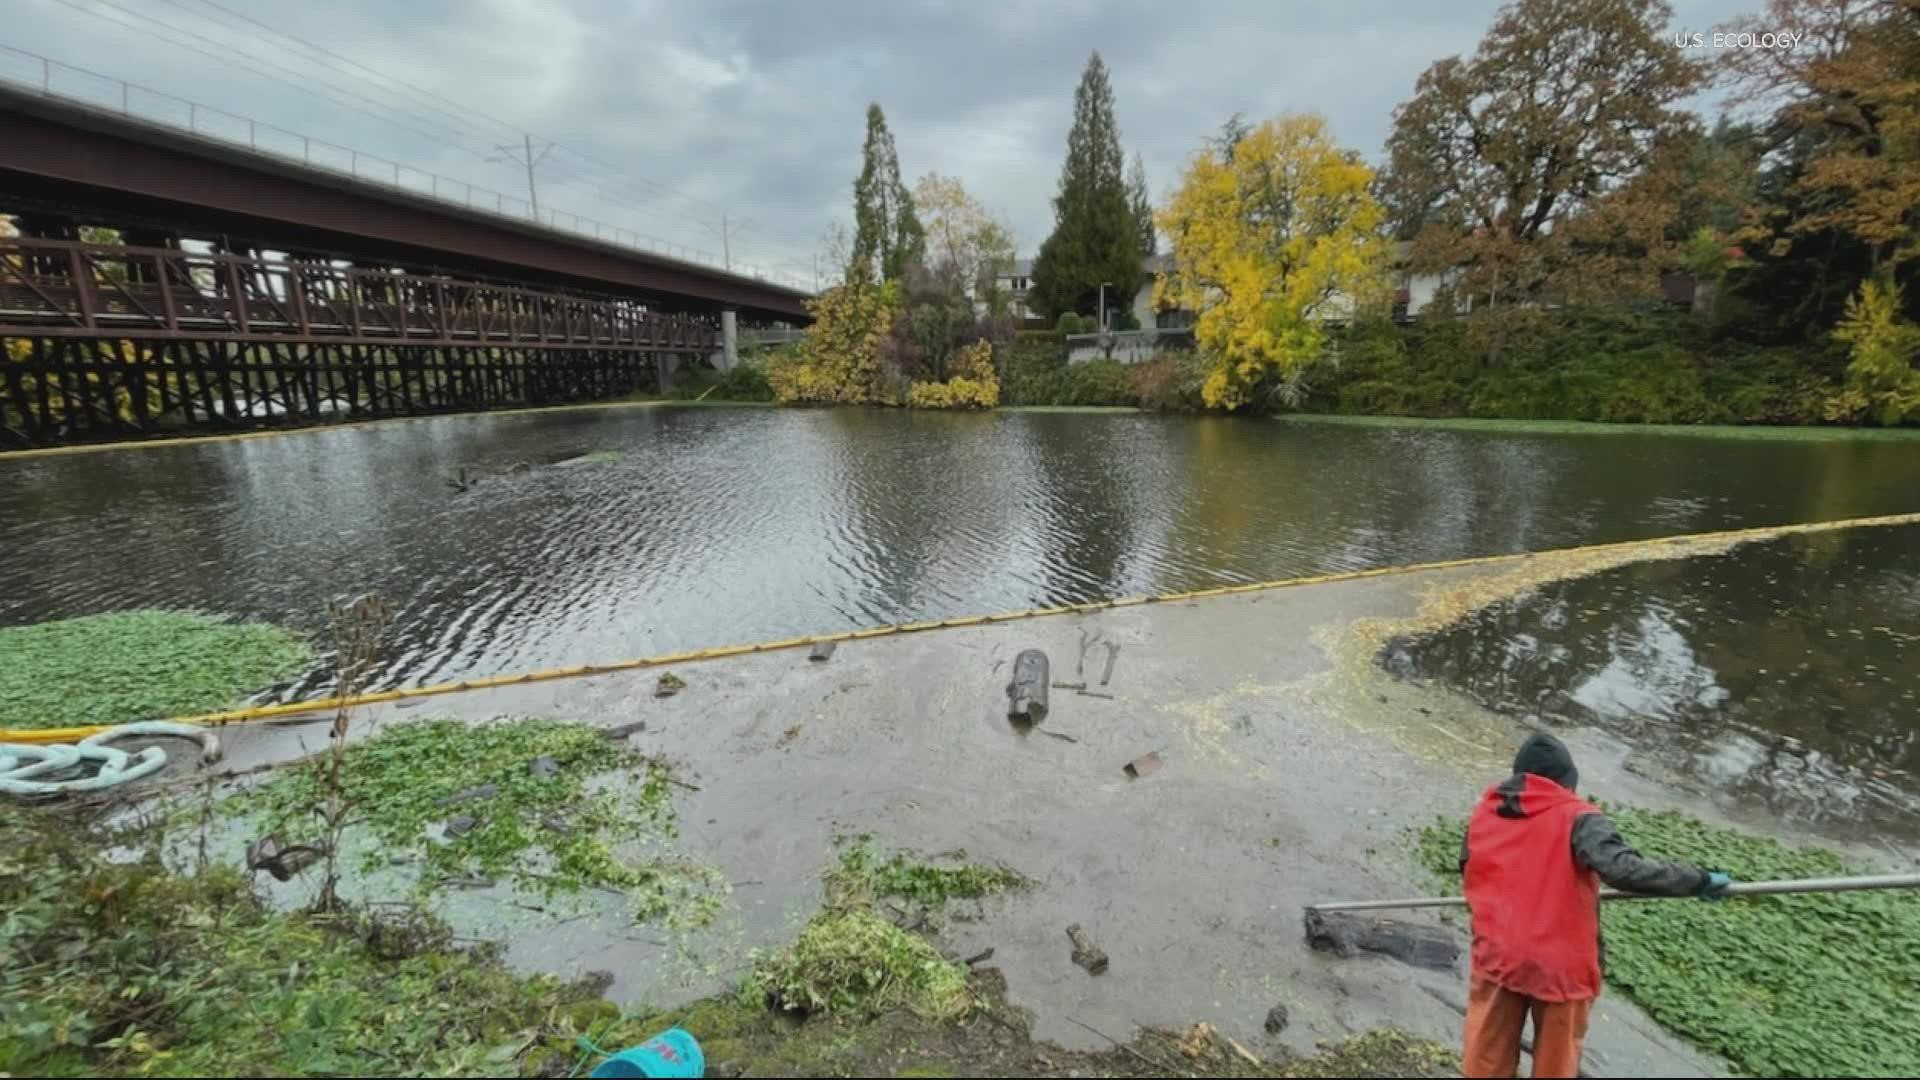 An Oct. 12 fire at a car dealership sent oil flowing toward Kellogg Creek. Officials are working to keep the oil from reaching the Willamette River.